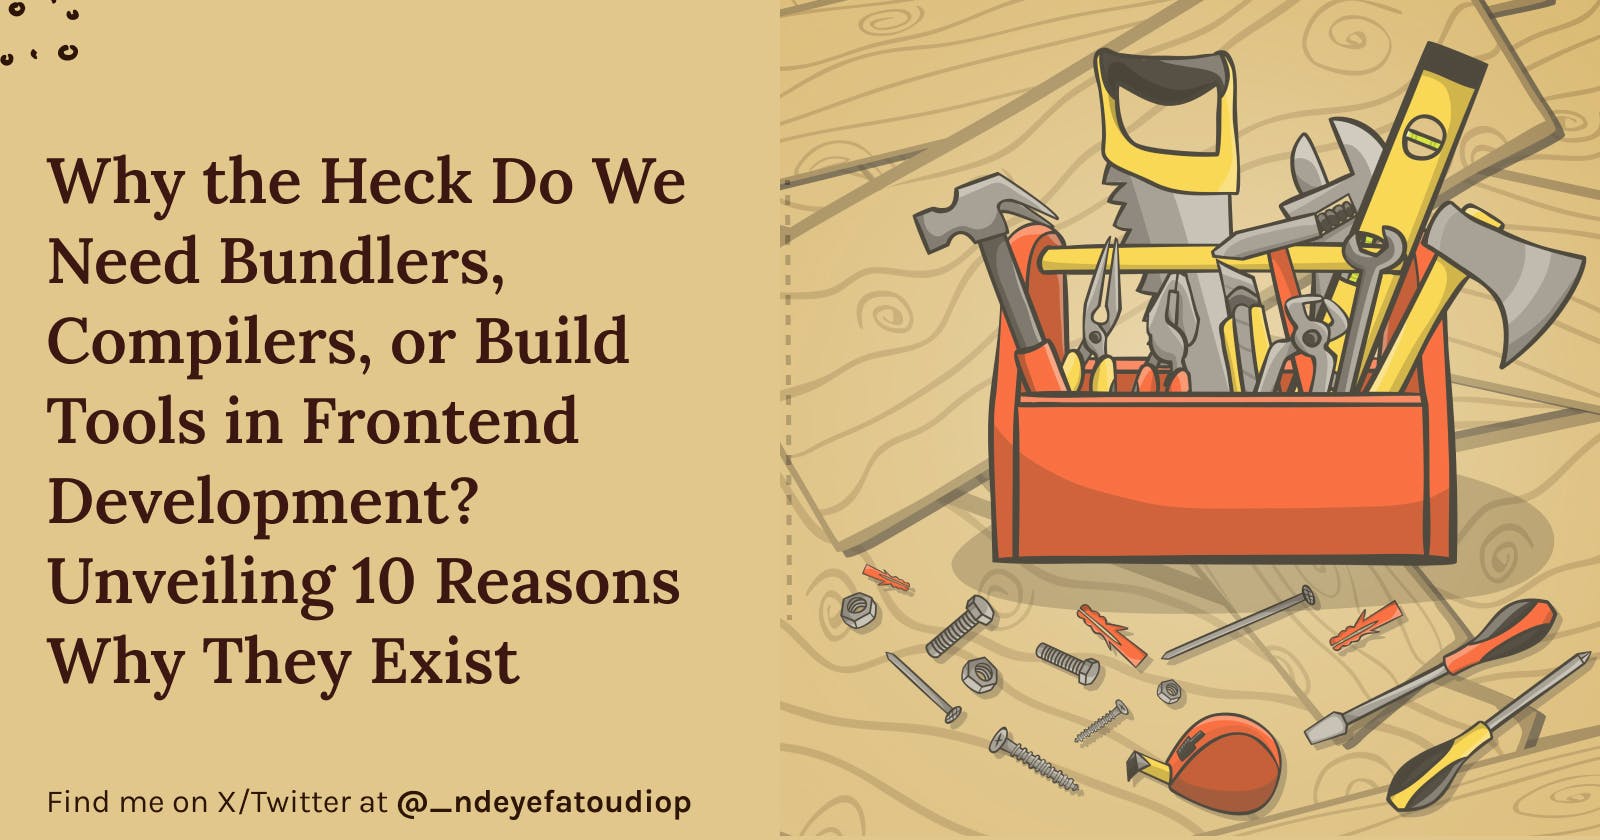 Why the Heck Do We Need Bundlers, Compilers, or Build Tools in Frontend Development? Unveiling 10 Reasons Why They Exist ✨